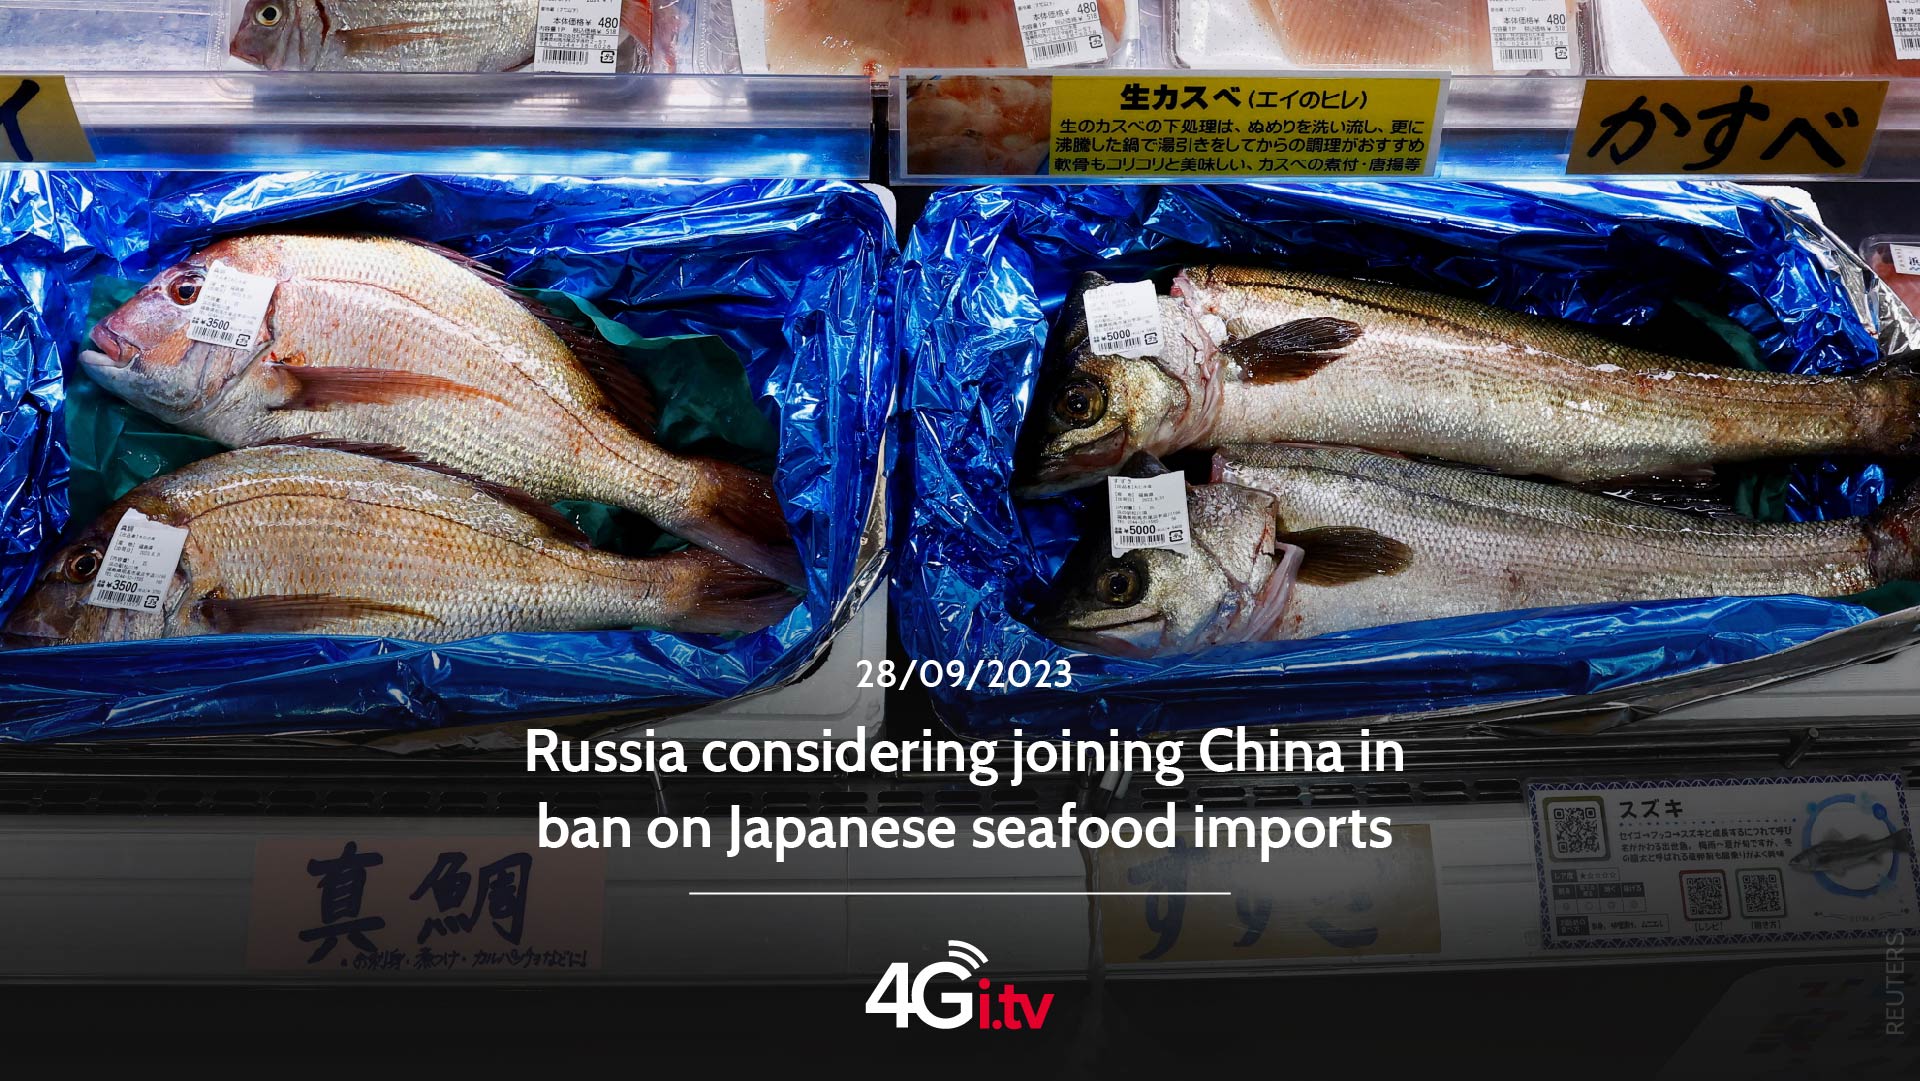 Lesen Sie mehr über den Artikel Russia considering joining China in ban on Japanese seafood imports